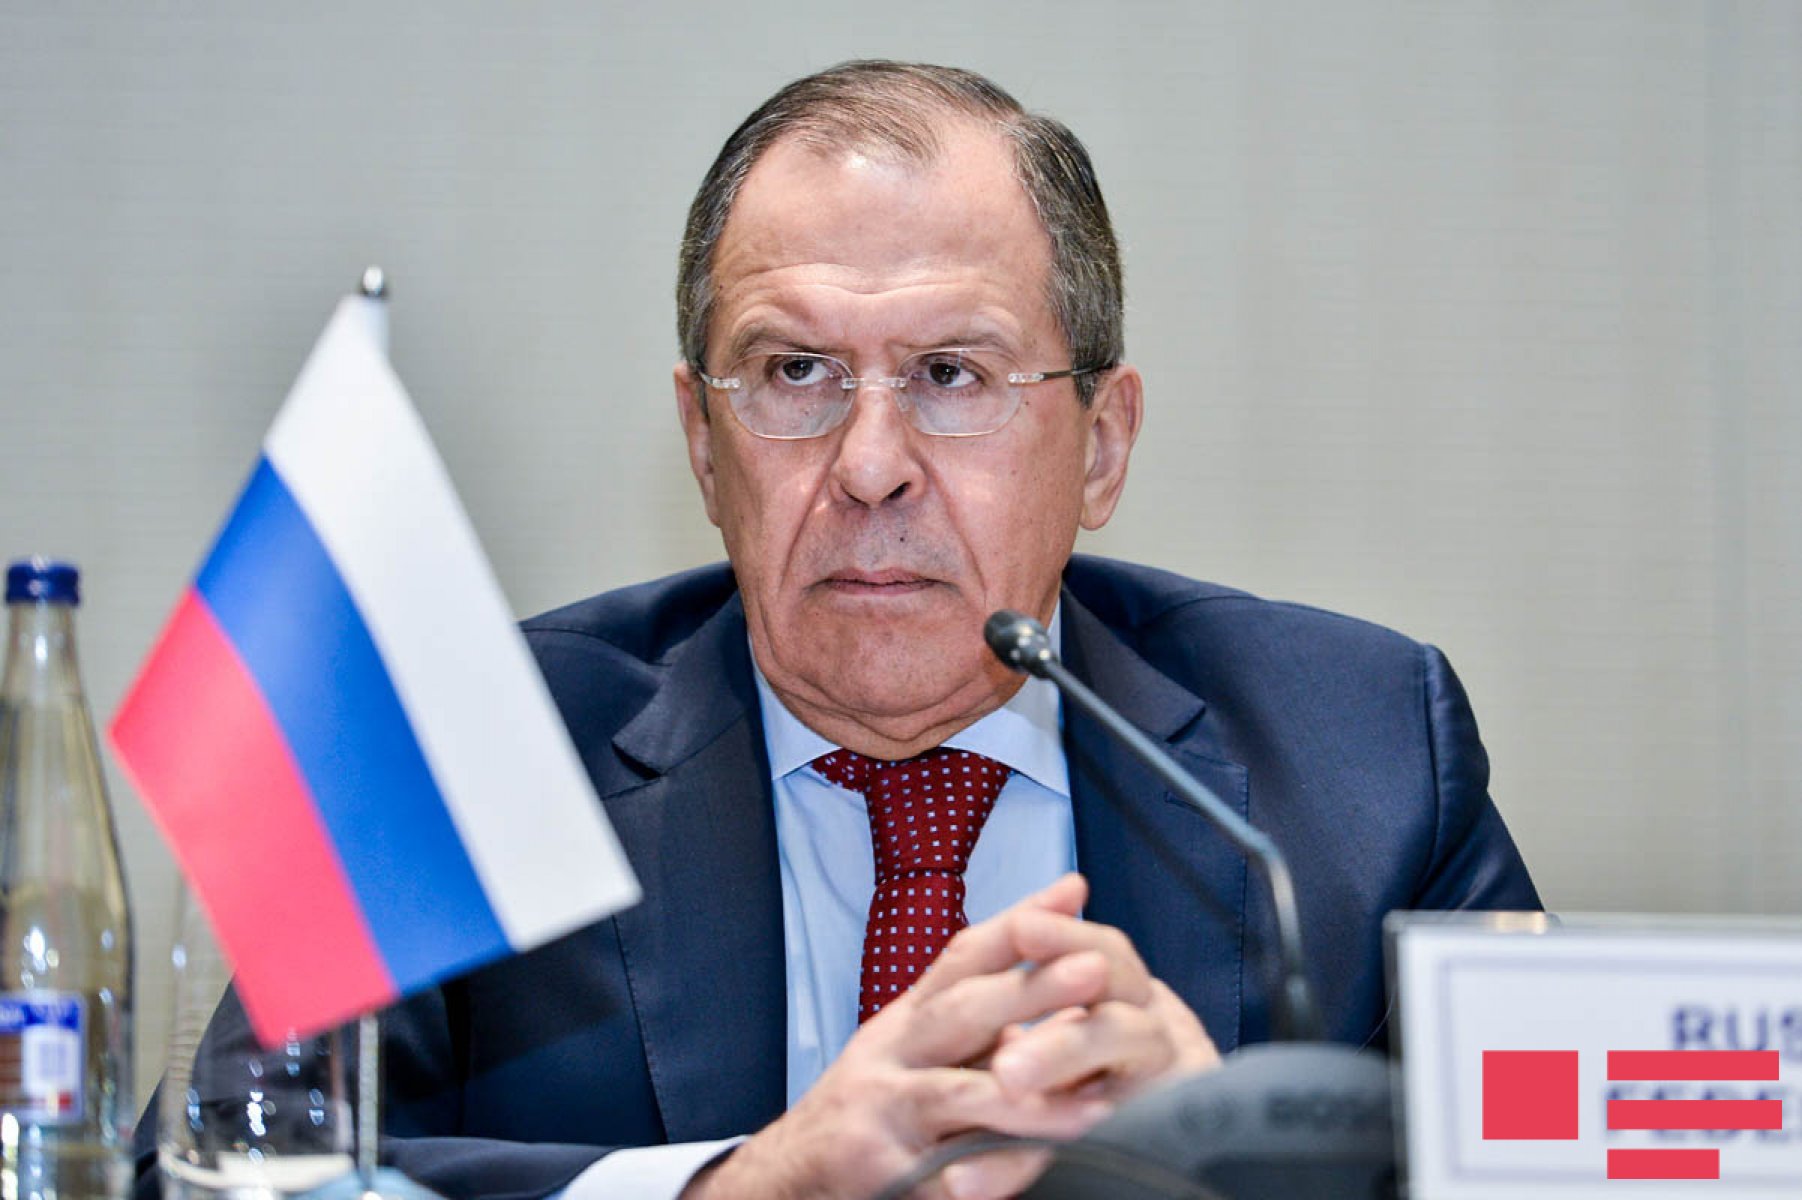 Lavrov: Moscow expects political will for mutual concessions from parties